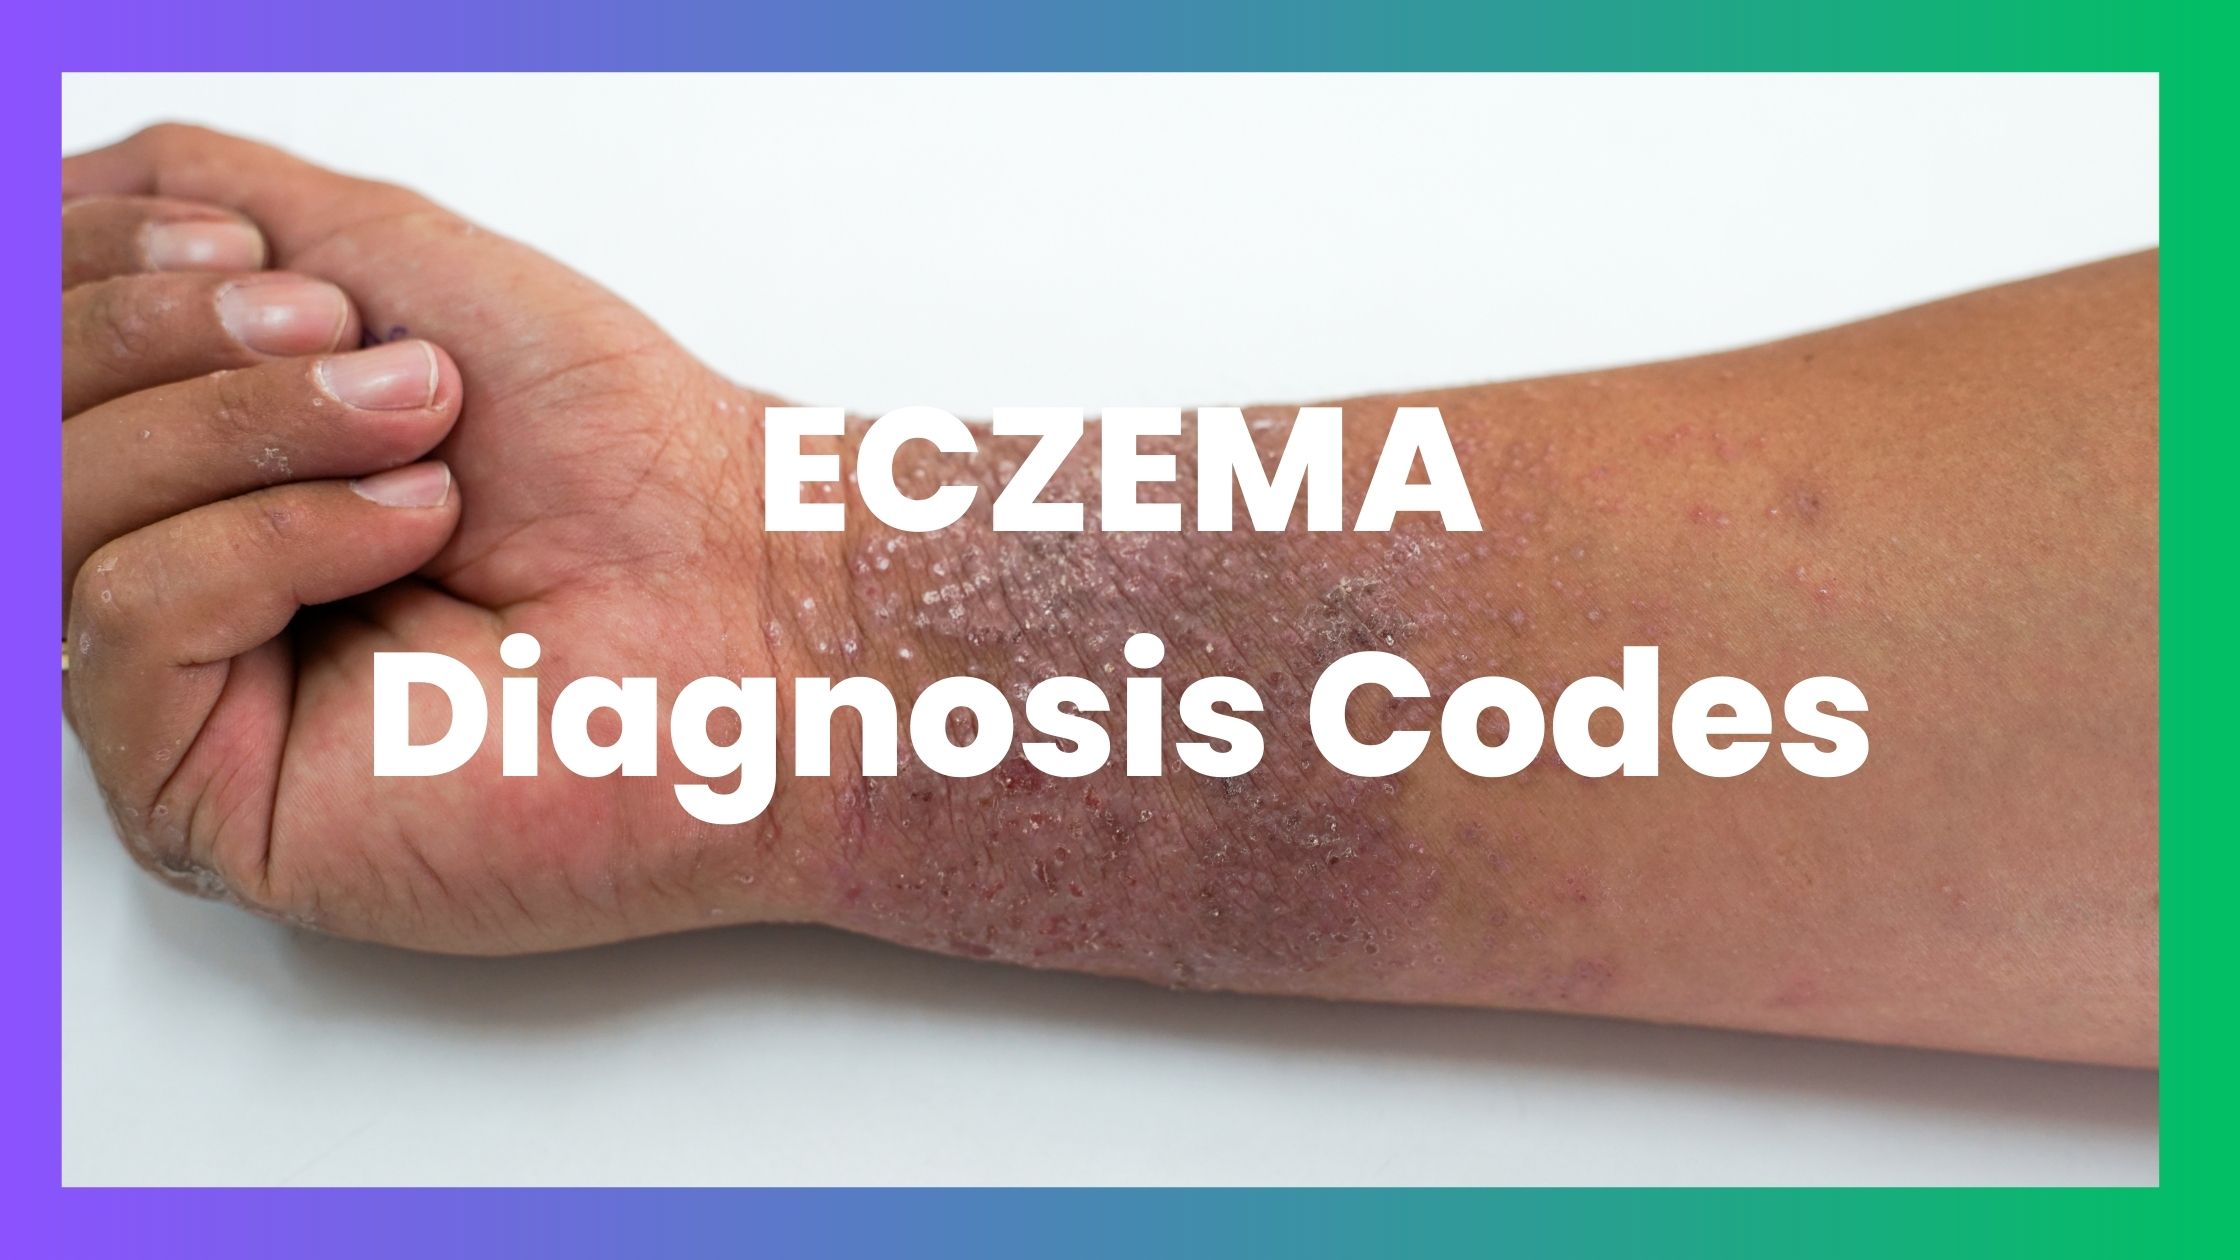 Eczema icd 10 codes and Dermatitis codes are from (L20-L30)